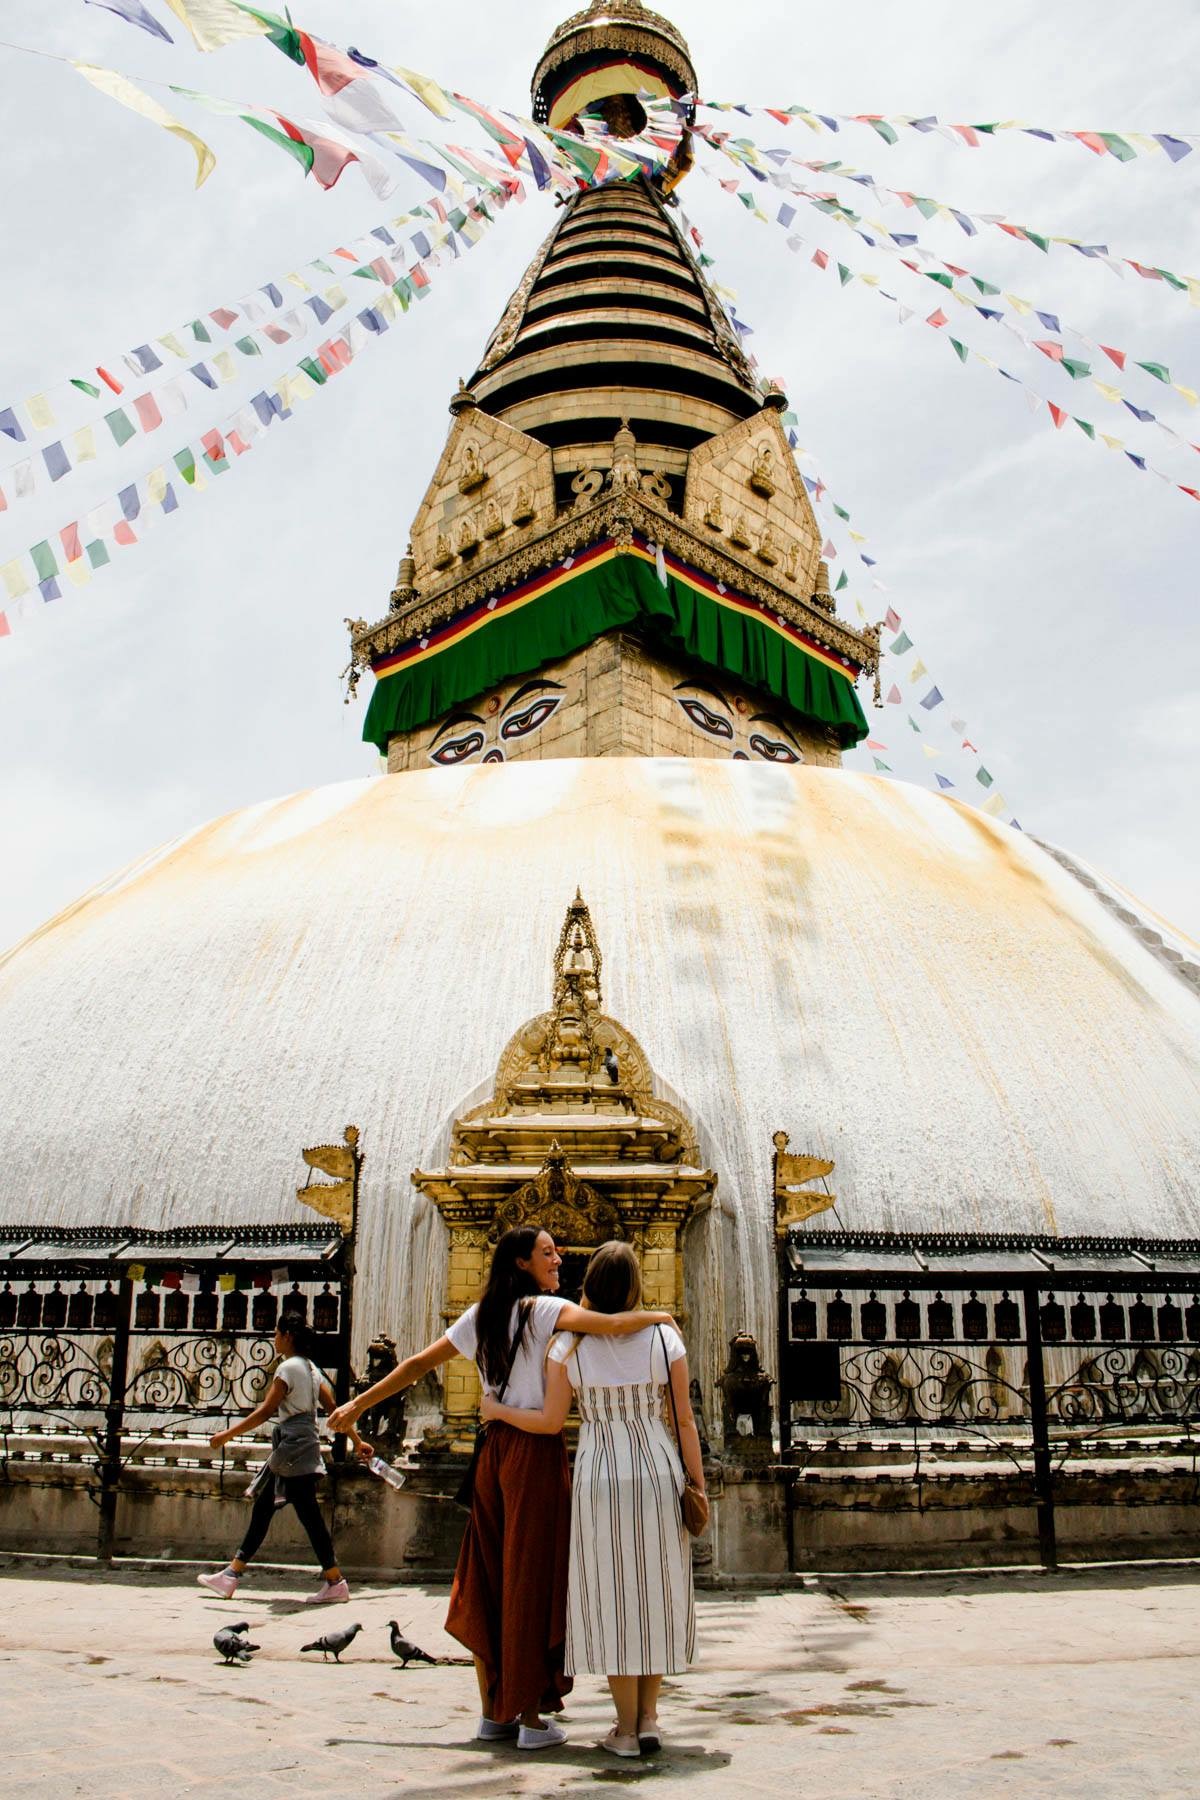 Our time spent exploring Kathmandu, Nepal! This is our recap of what you can do with only 24 hours in this bucket list destination.